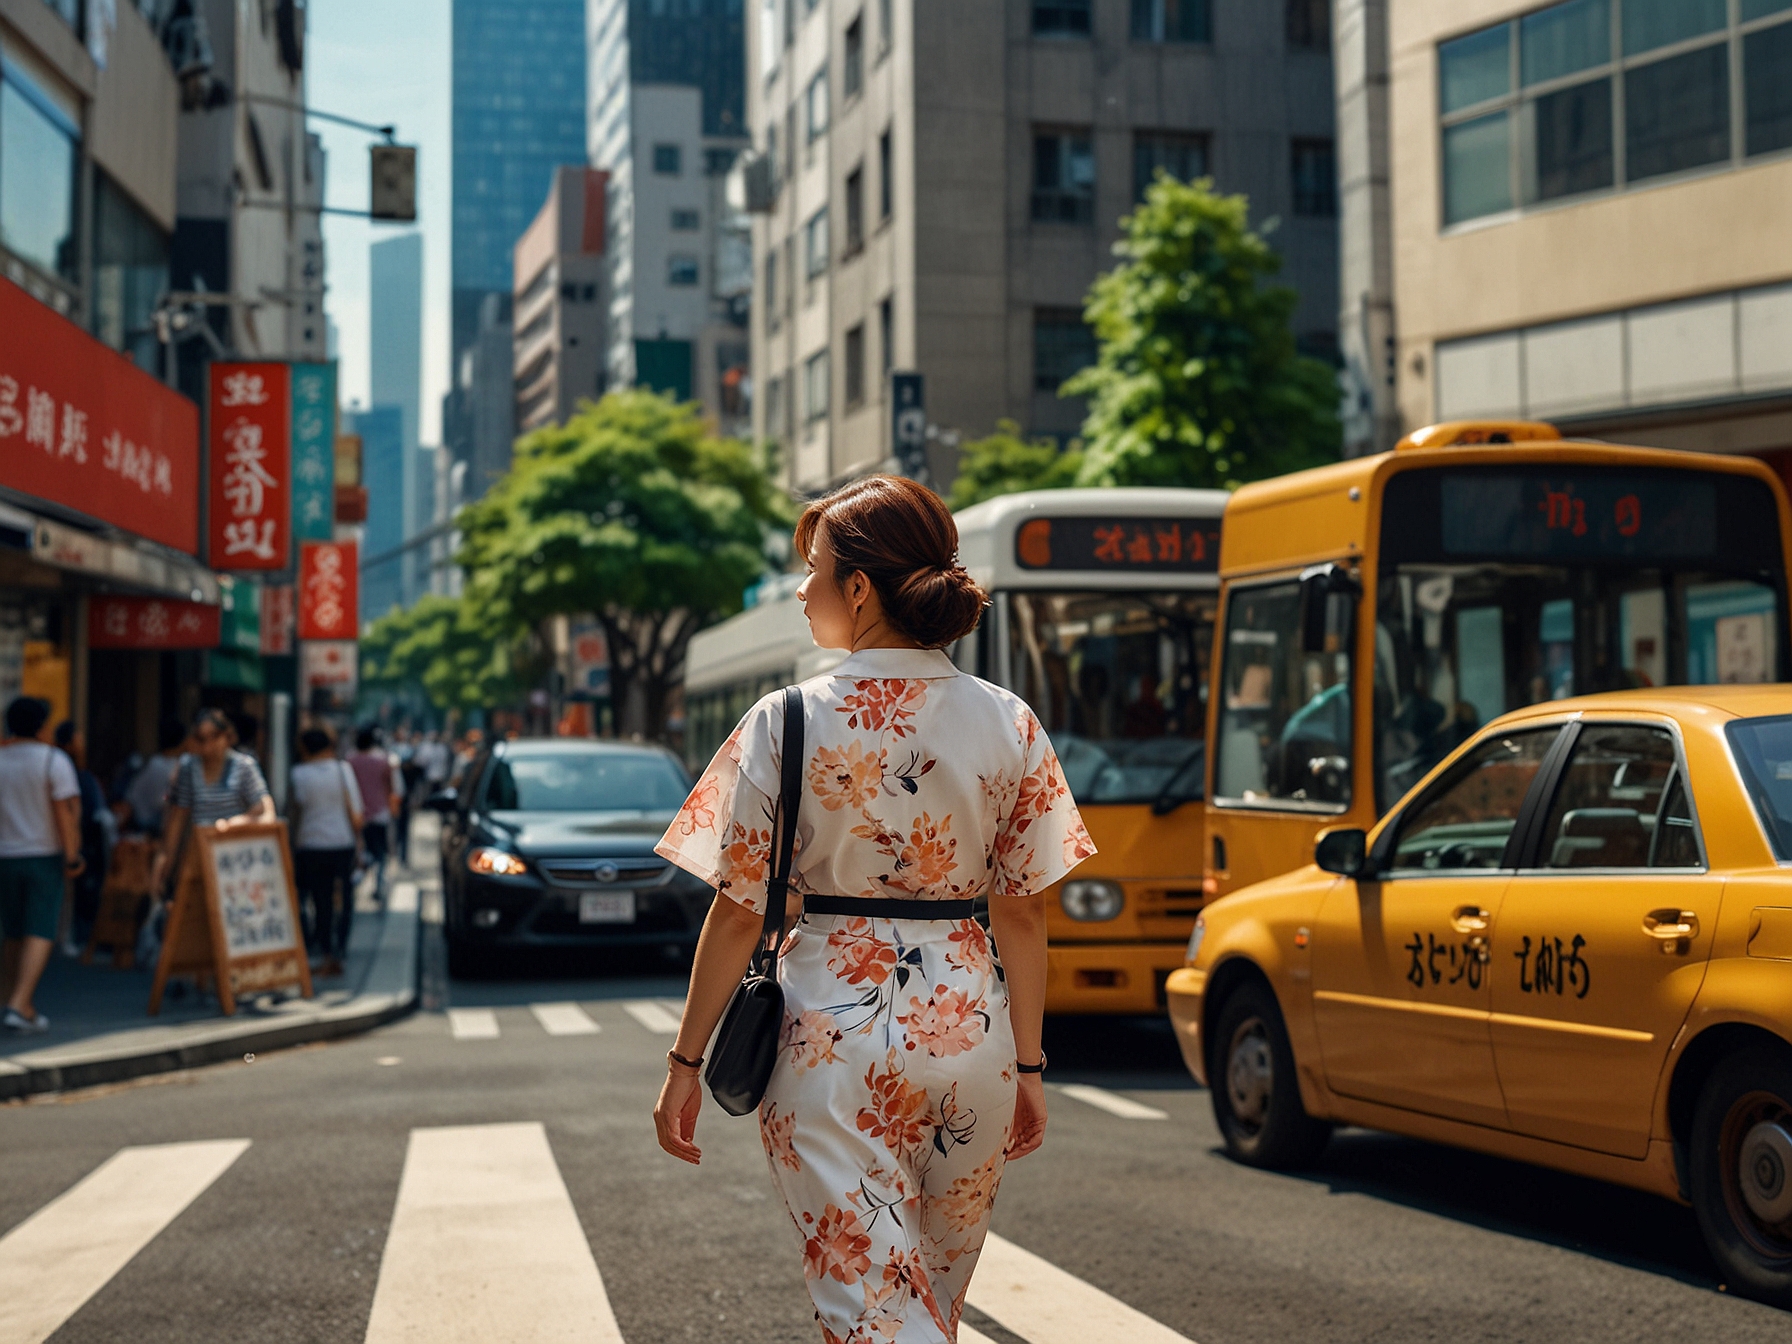 A woman comfortably navigating the streets of Tokyo, Japan, surrounded by vibrant city life and traditional landmarks. It highlights the city's safety, efficient transportation, and the politeness of locals.